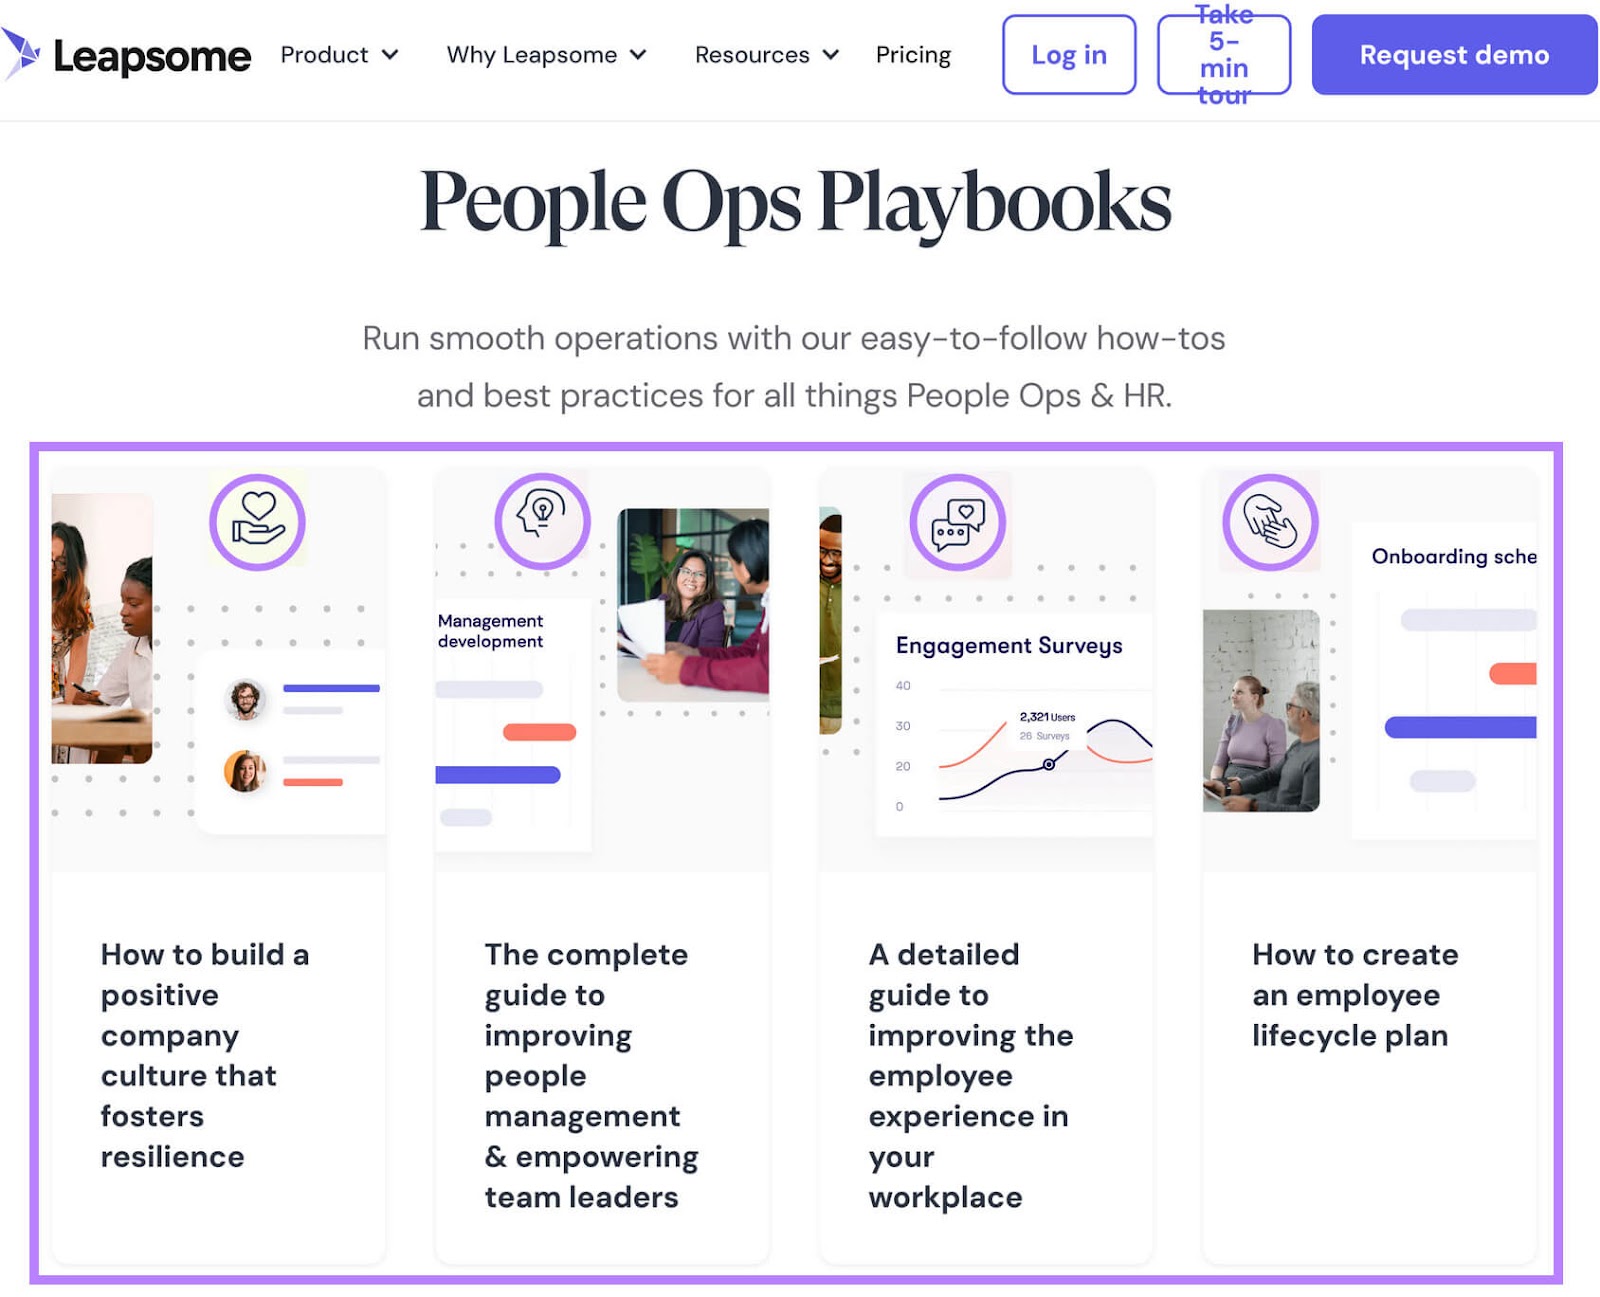 Content library section from Leapsome featuring "People Ops Playbooks" with four informational cards, each with an icon.